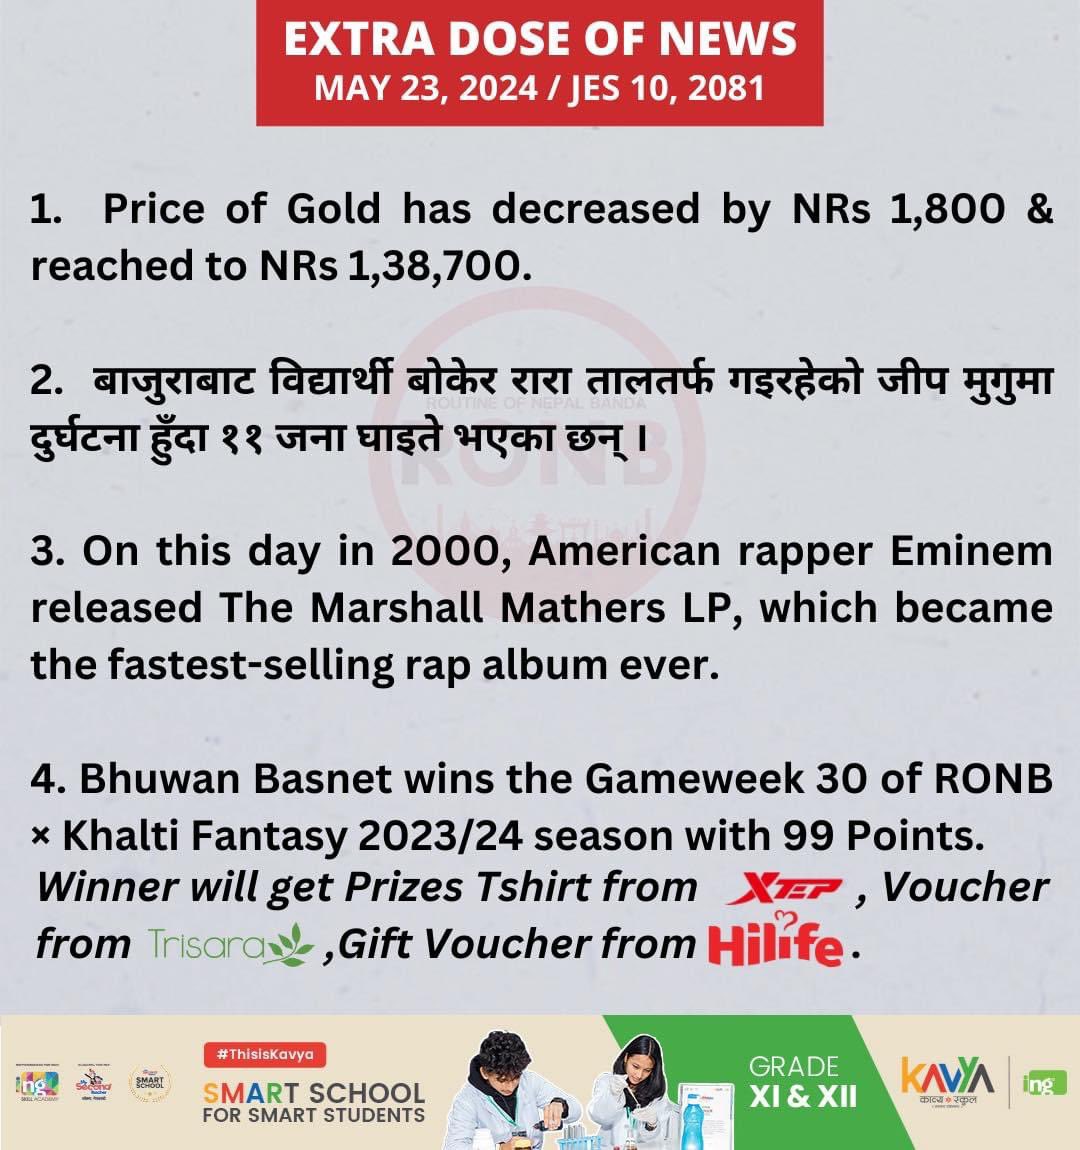 It’s time for RONB’s extra dose of news for today. #StayUpdated